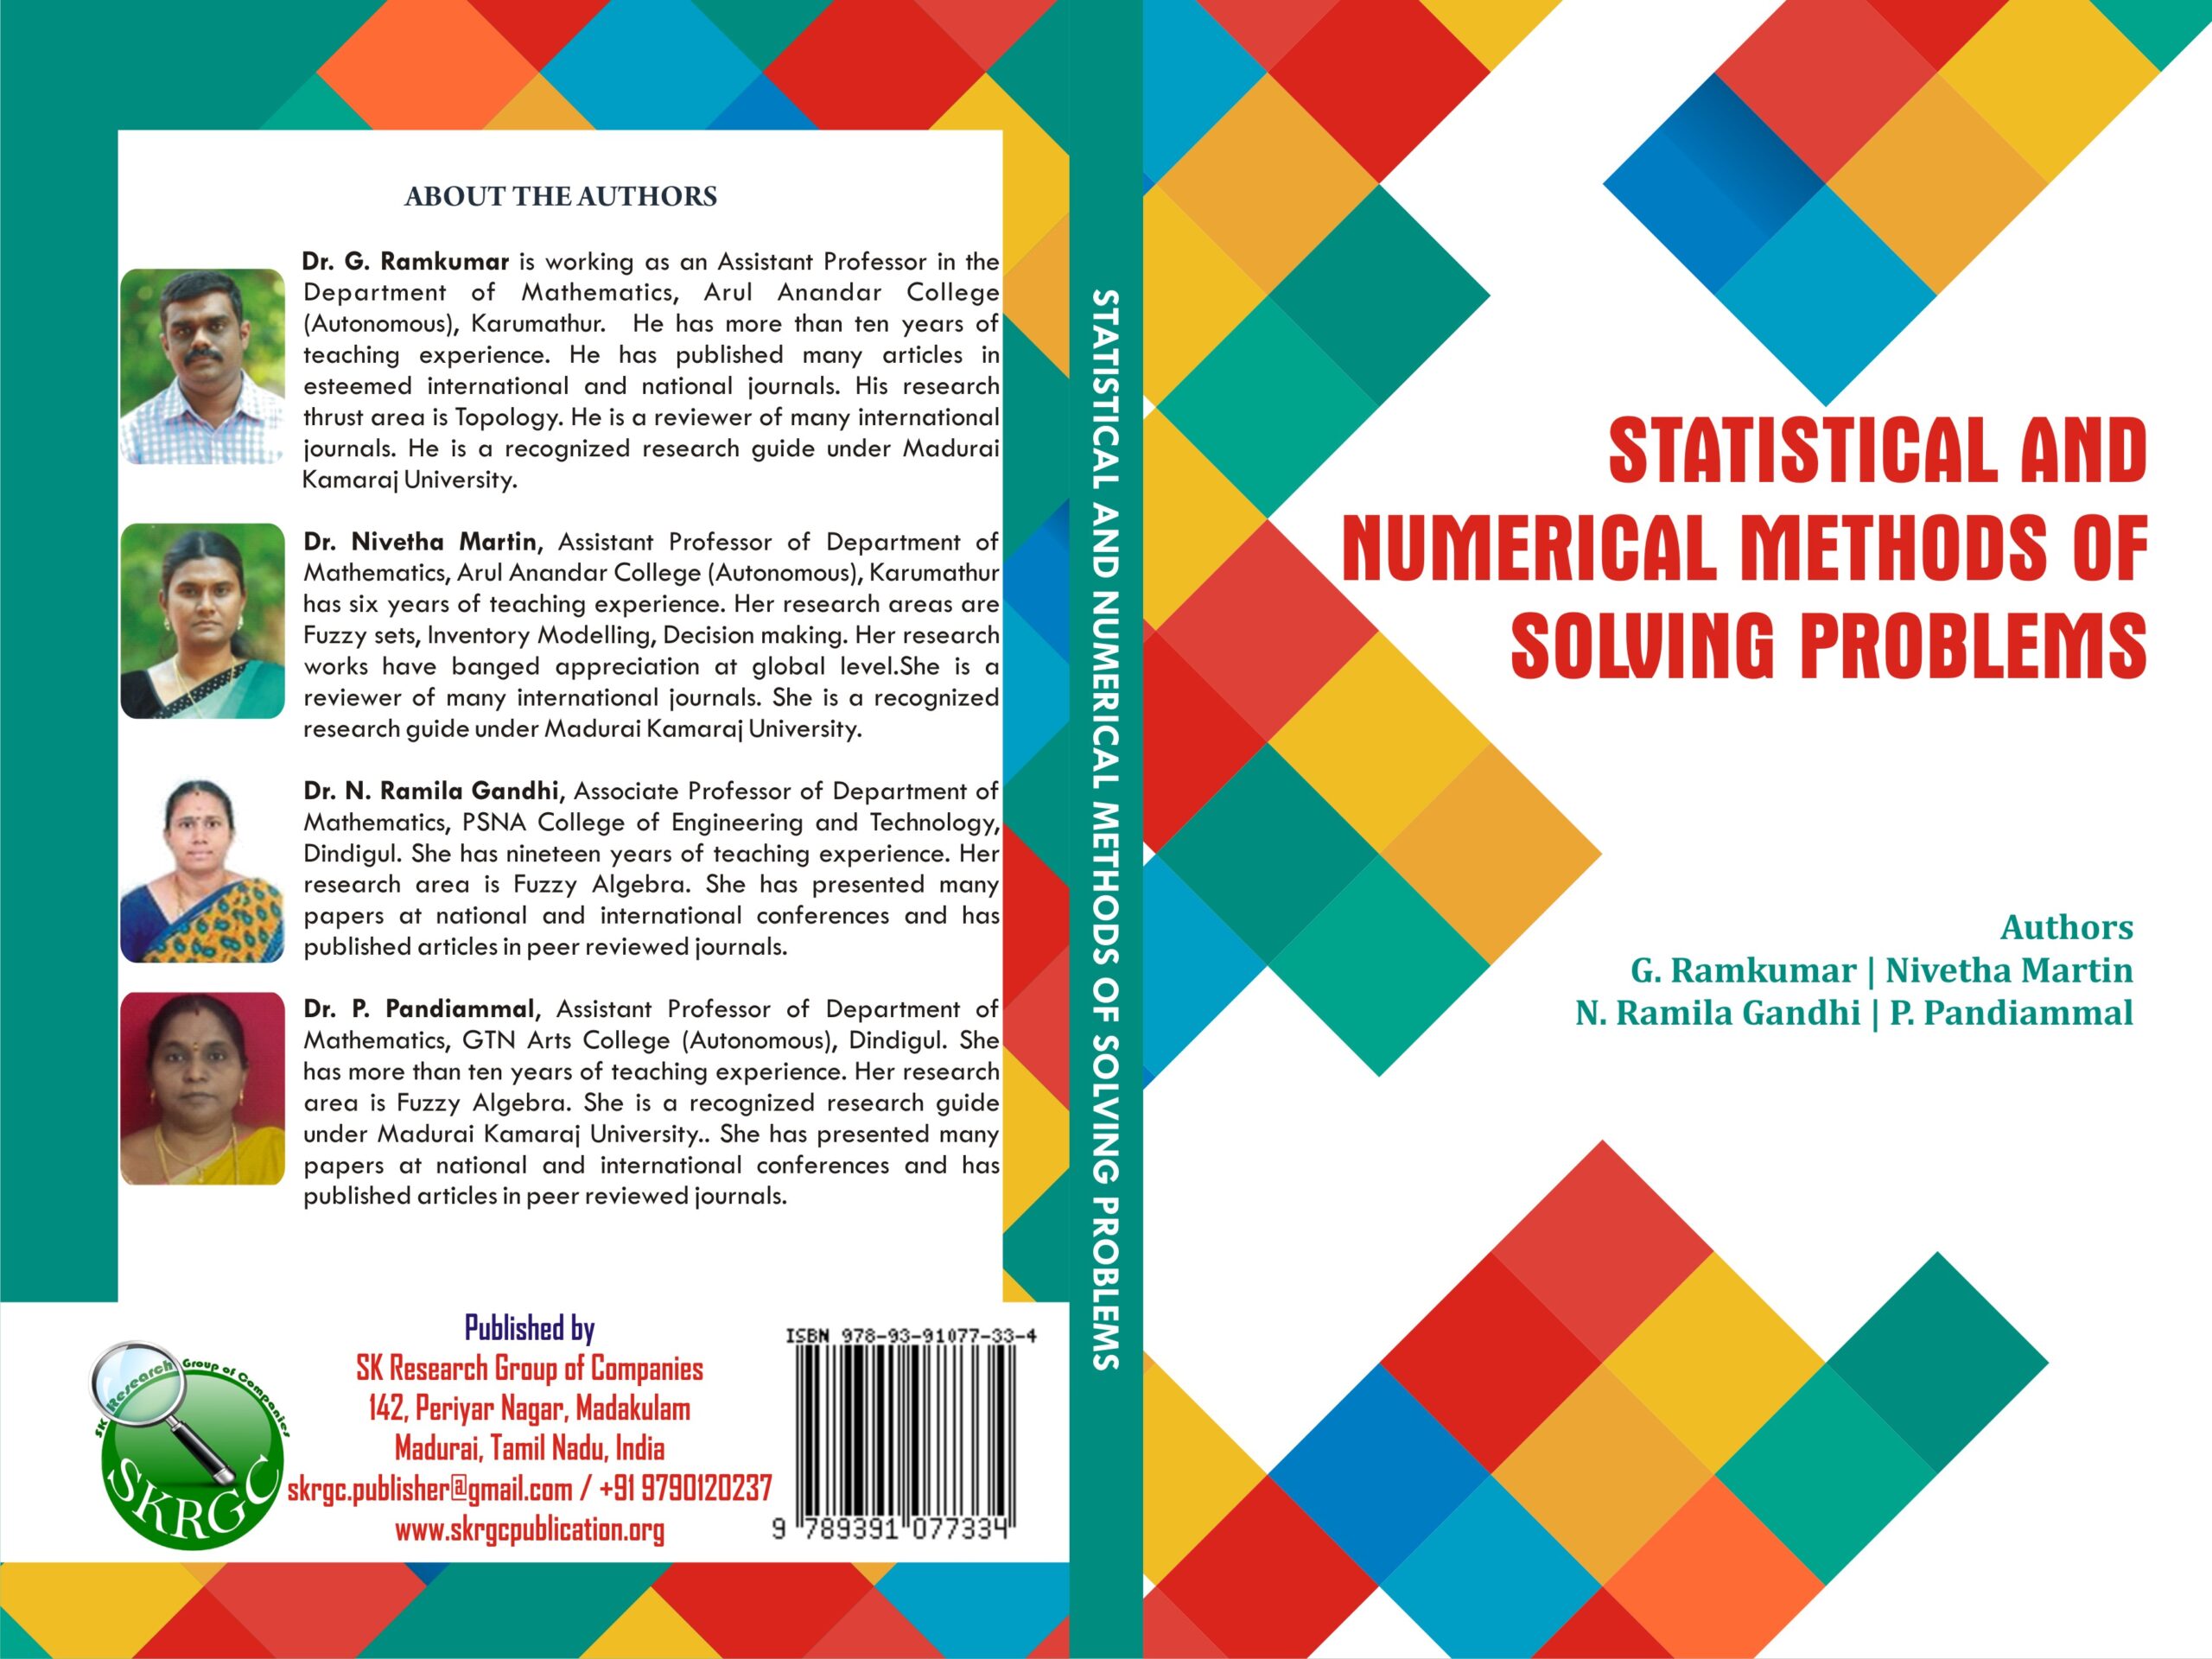 STATISTICAL AND NUMERICAL METHODS OF SOLVING PROBLEMS